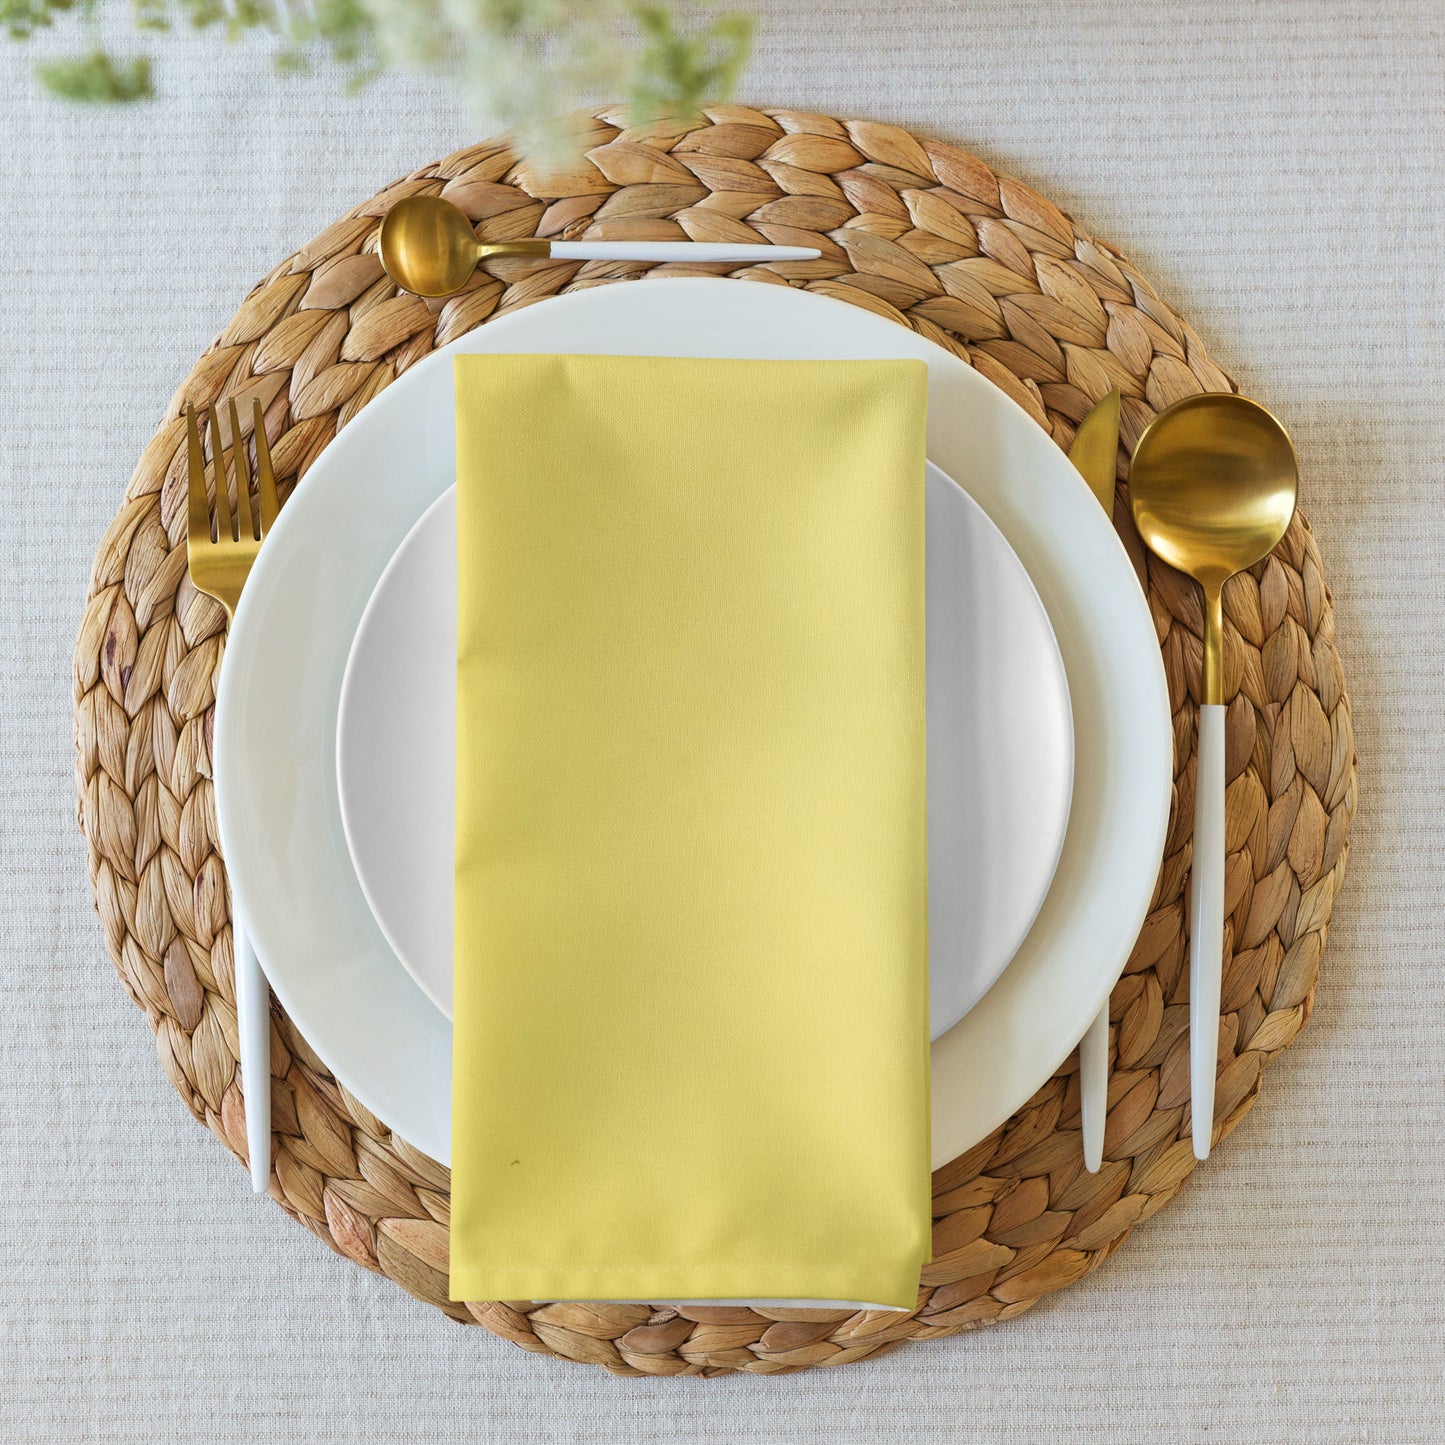 Yellow cloth napkin folded and placed in center of dinner place setting on rattan placemat.